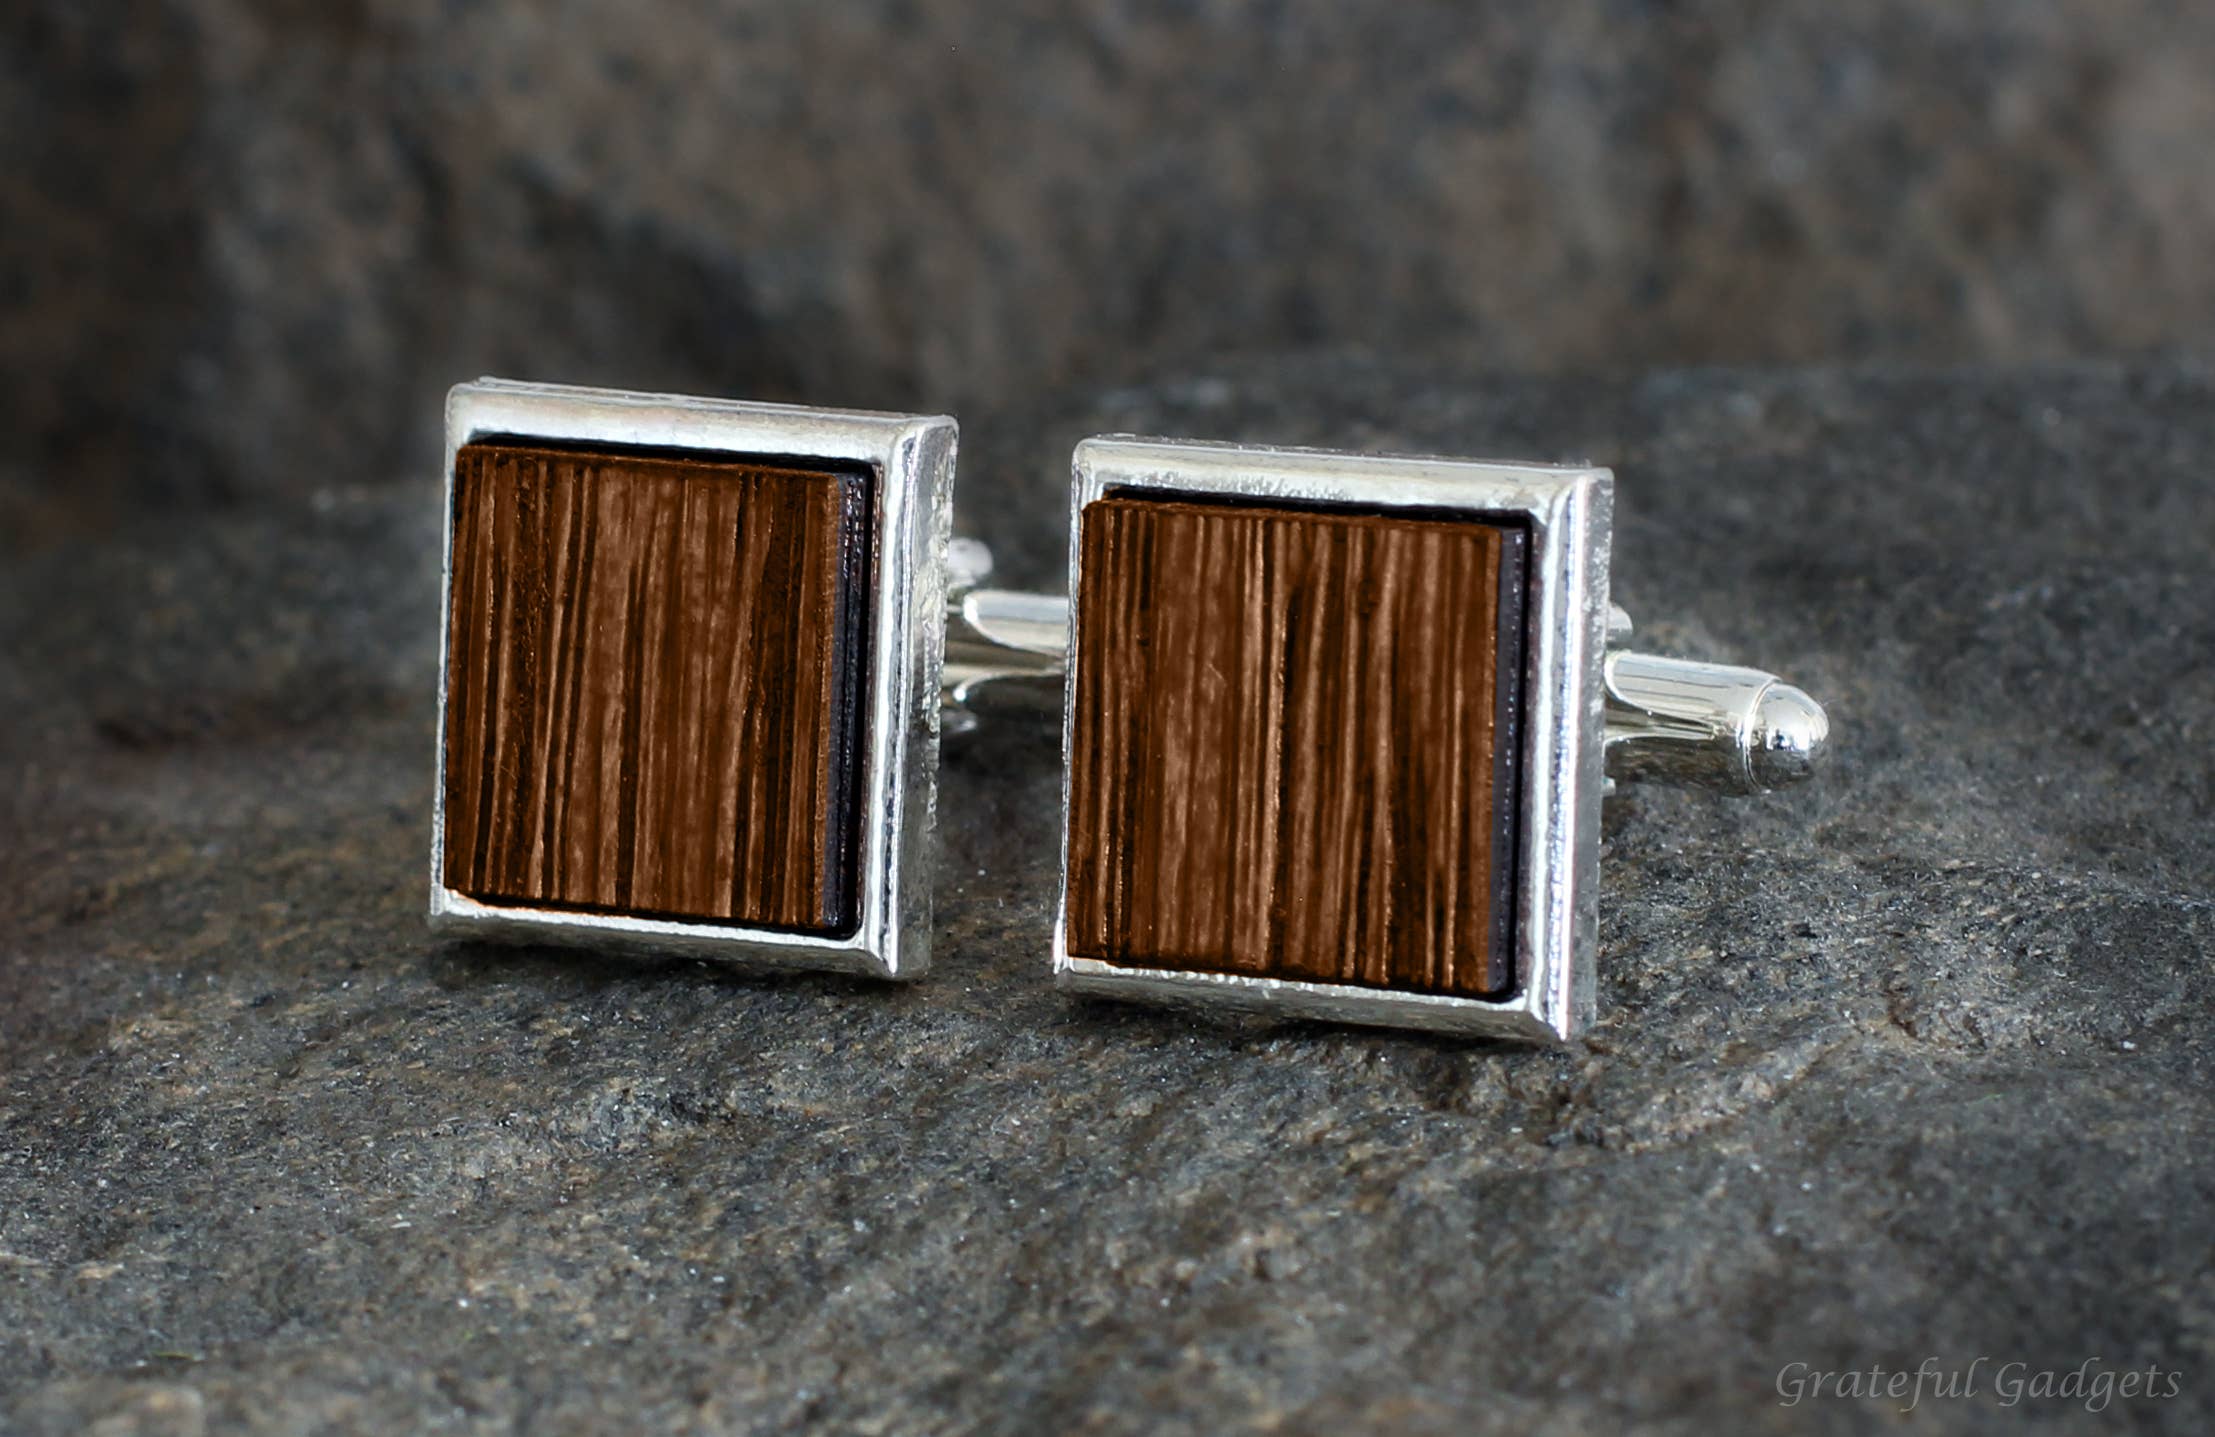 Groomsman Gifts Popcorn Wood Cufflinks Gift For Him Wedding Gifts and Personalized